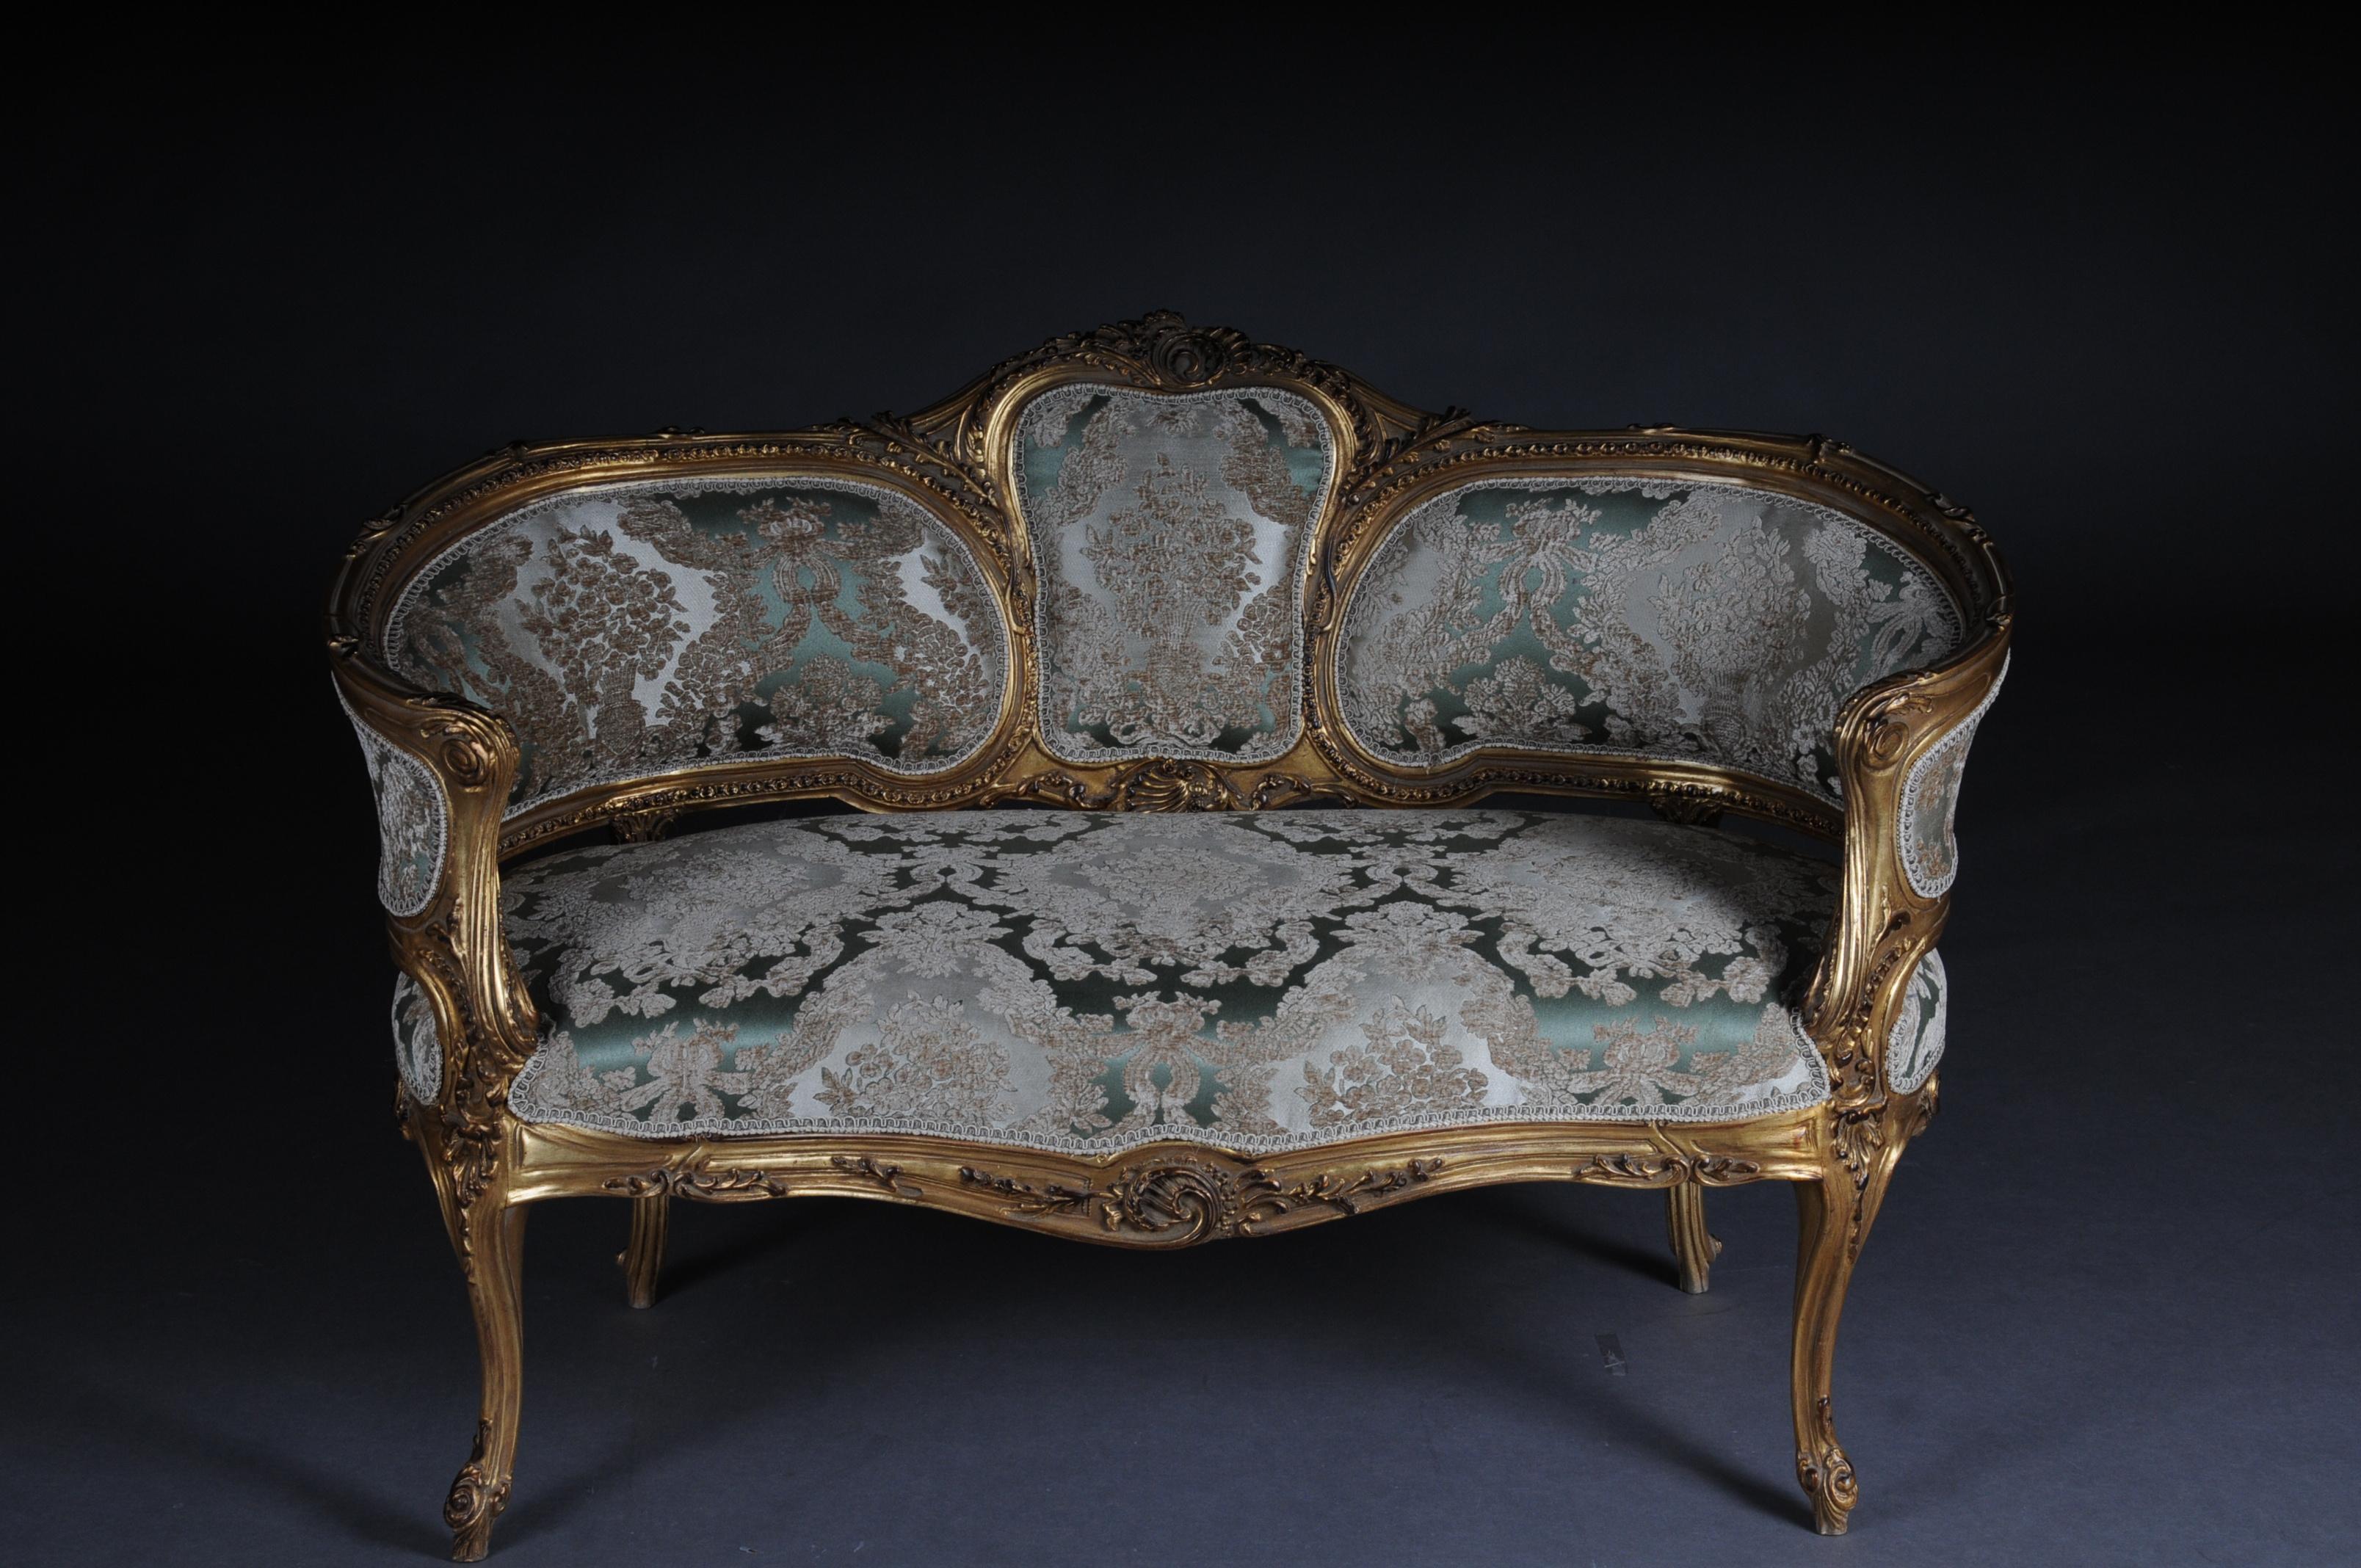 Solid beechwood, carved and gilt gilded. Semicircular rising, curved backrest framing with rocaille crowning. Appropriately curved frame with rich carved ornaments. Also decorated frame on curved legs. Seat and backrest are finished with a